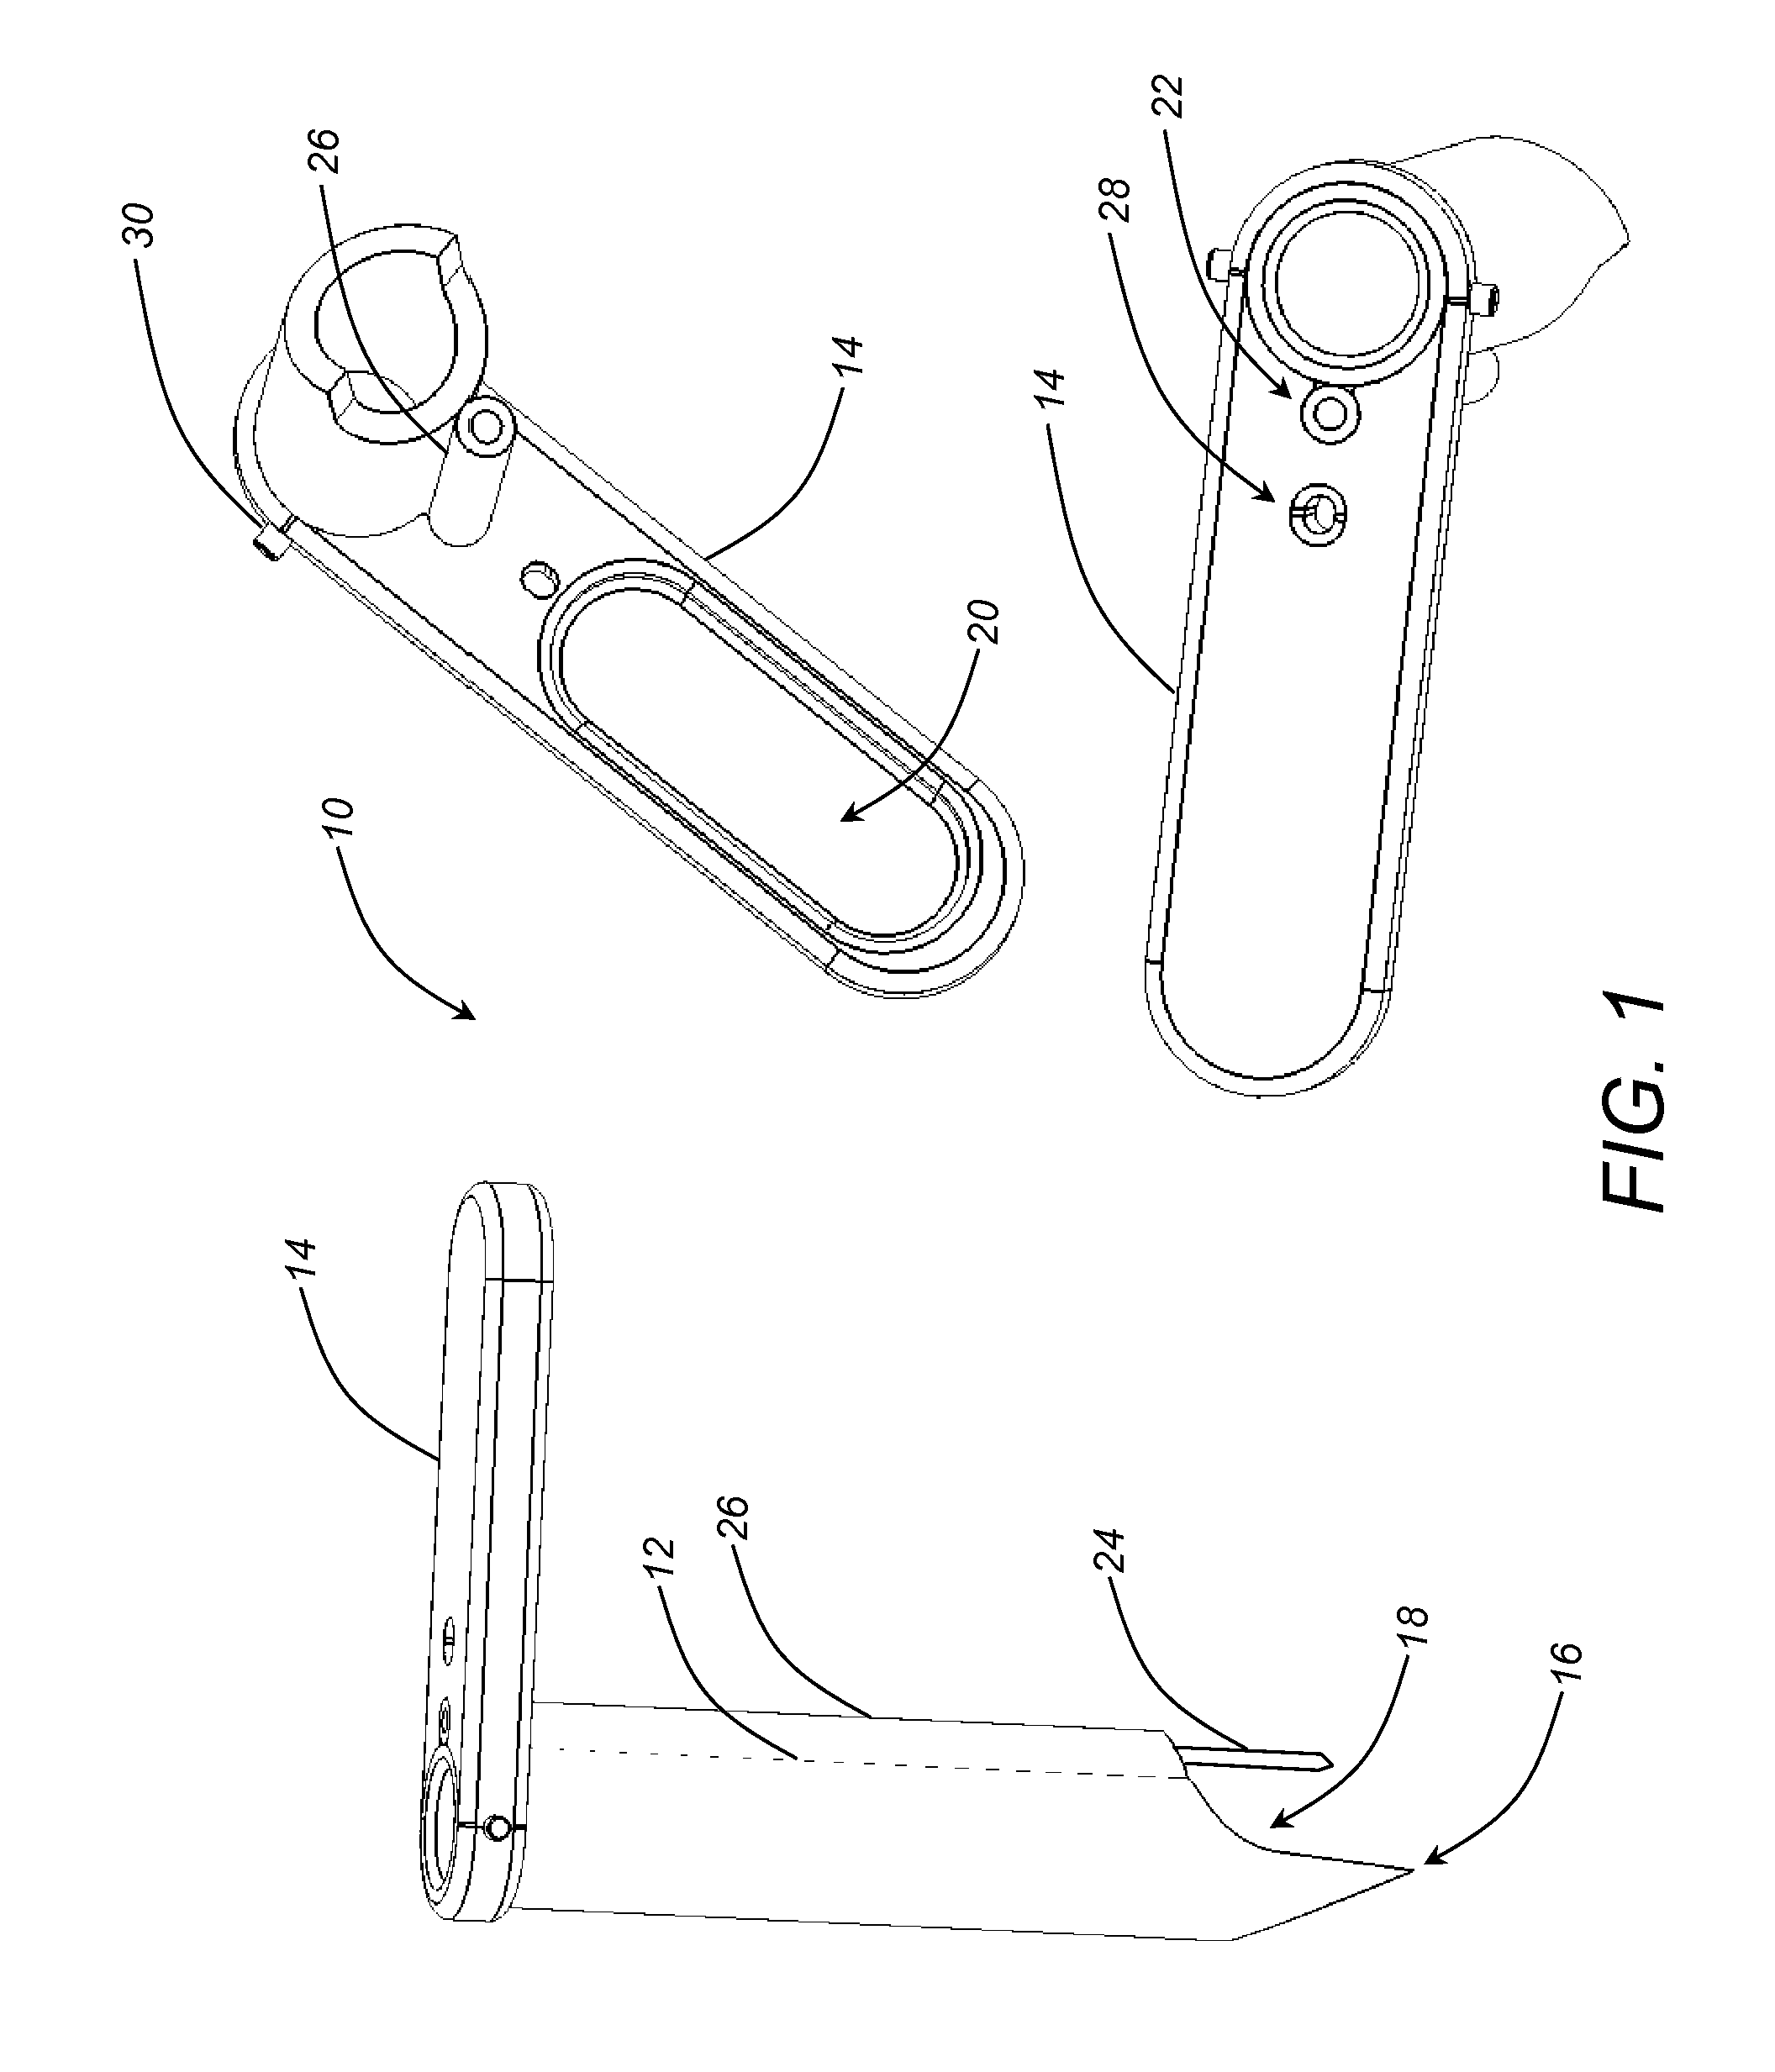 Sacroiliac joint fusion systems and methods